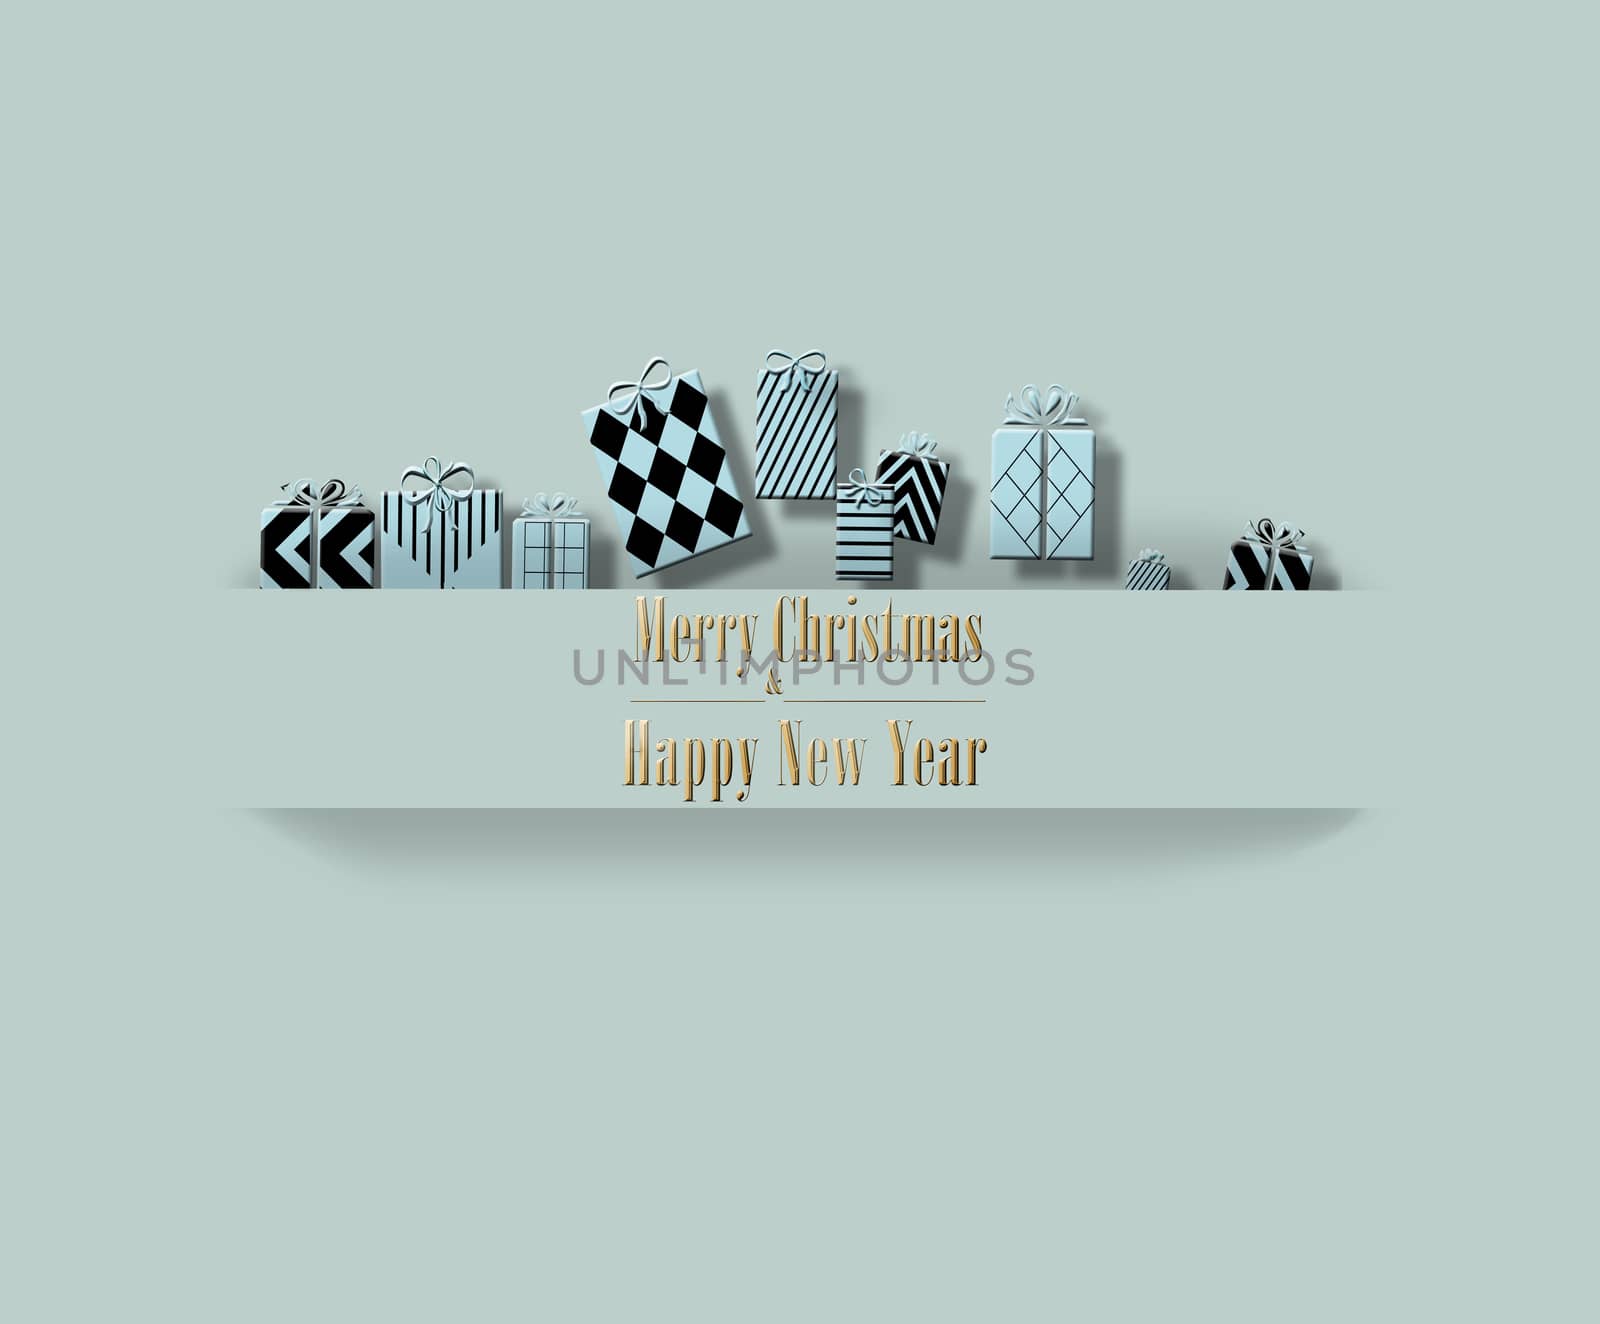 Elegant luxury contemporary Merry Christmas Happy New Year card with blue black gift boxes and text Merry Christmas and Happy New Year on pastel green background. 3D illustration